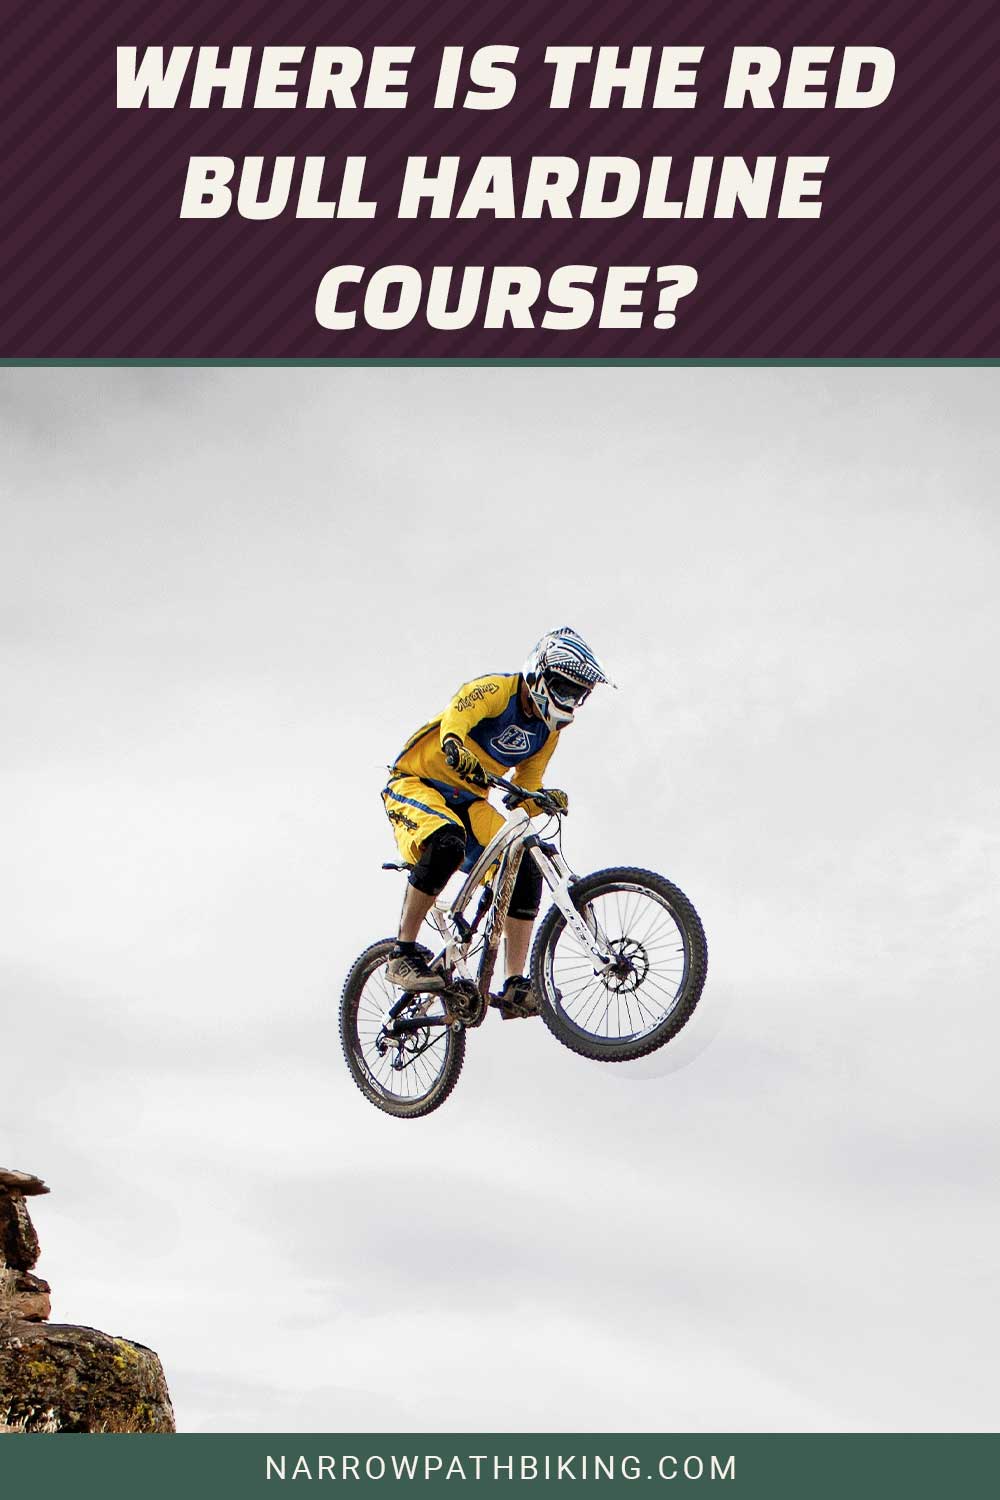 Where is the Red Bull Hardline Course?